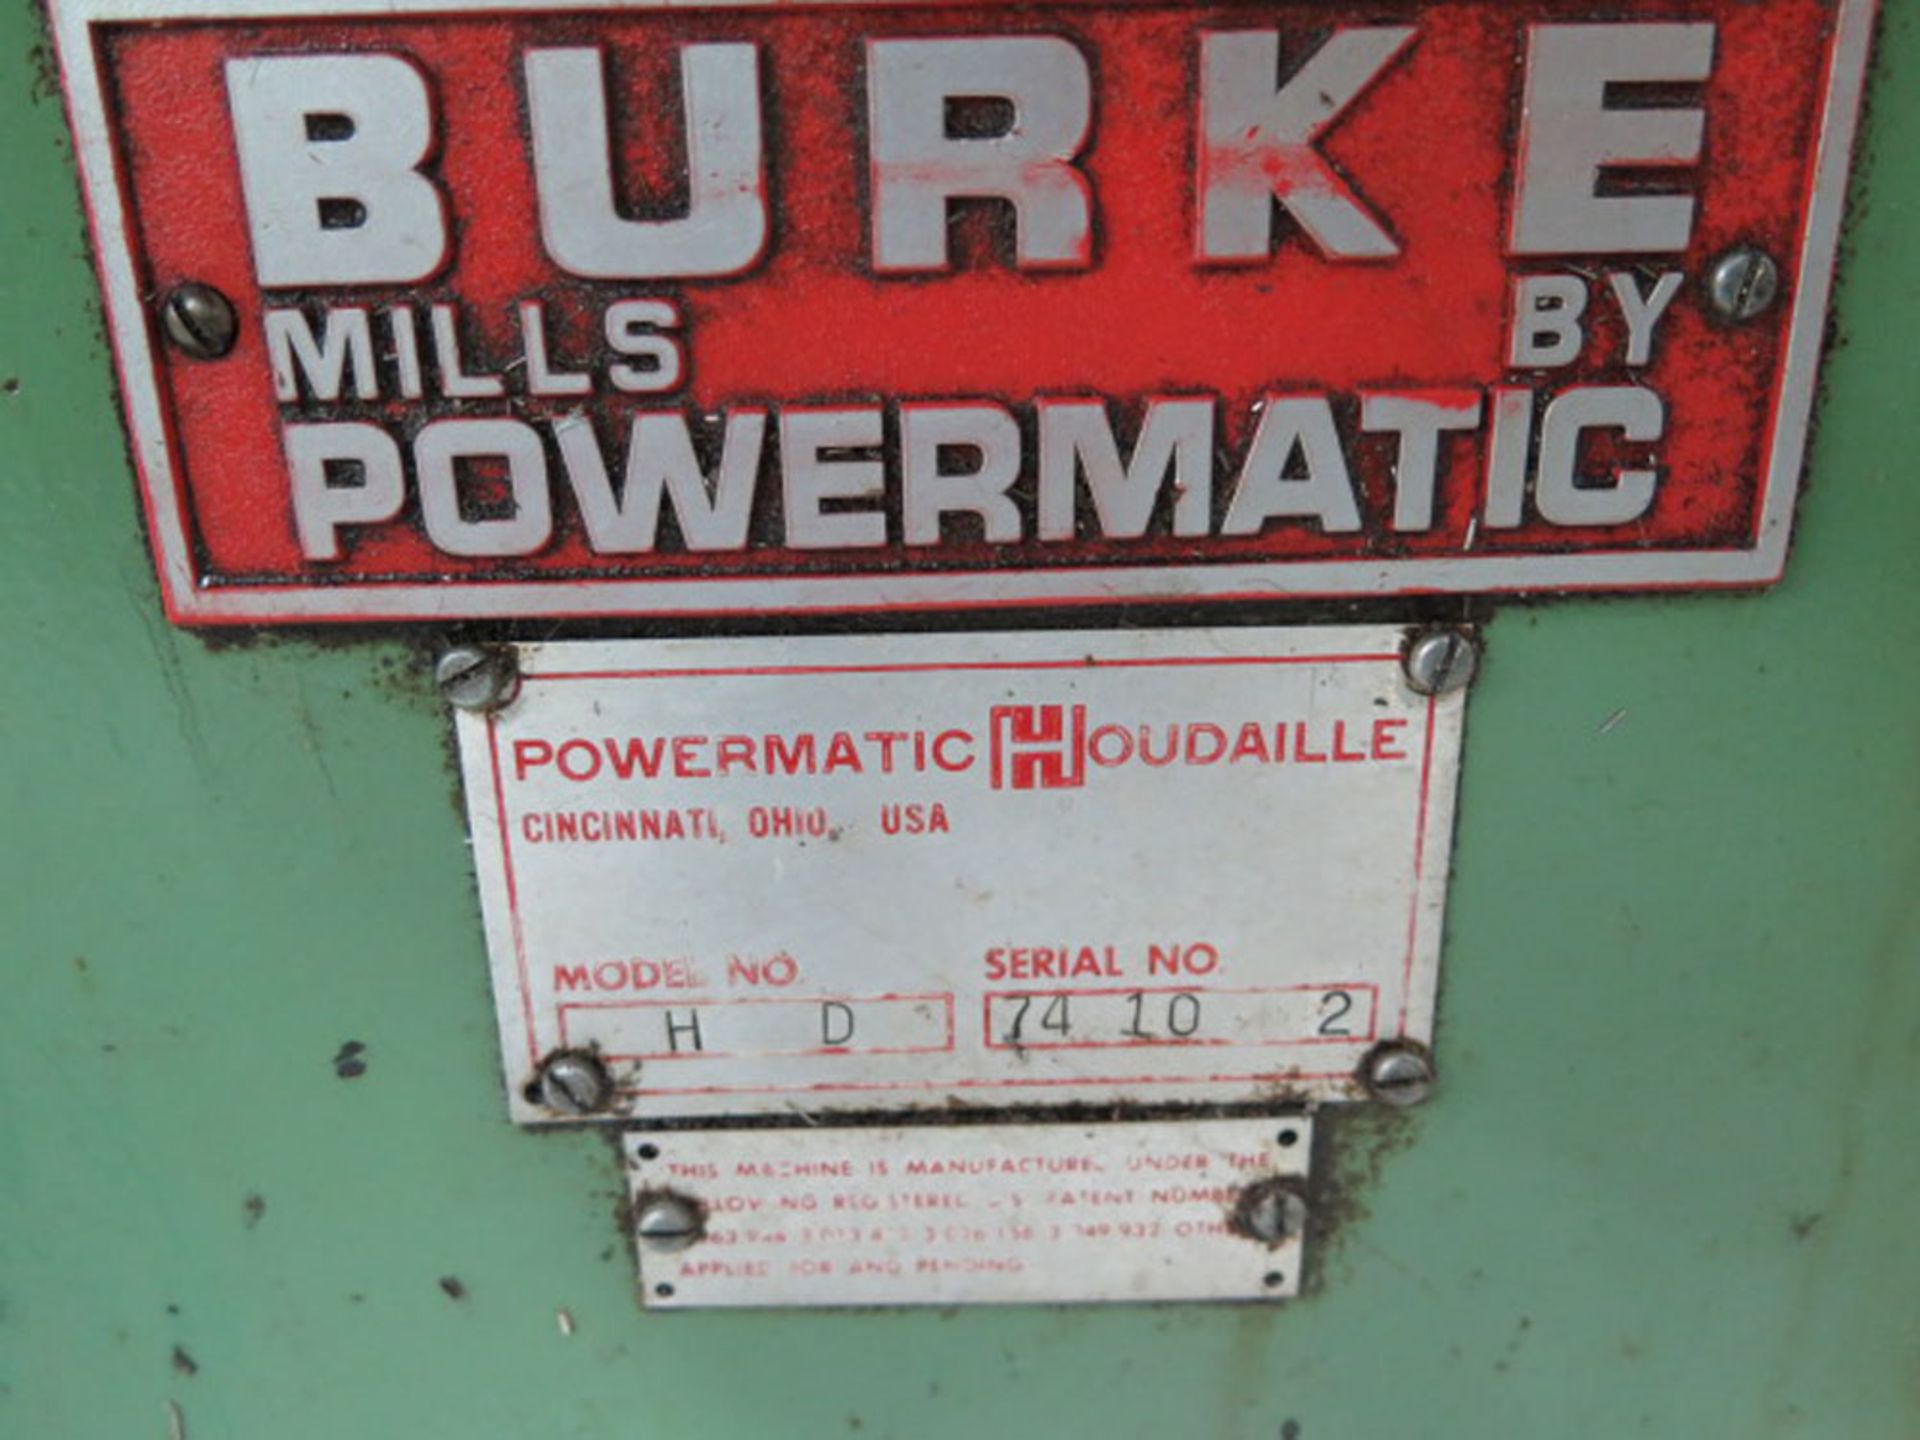 Burke Powermatic Duplex Twin Spindle Horizontal Production Mill 10'' x 36'' - Image 8 of 8